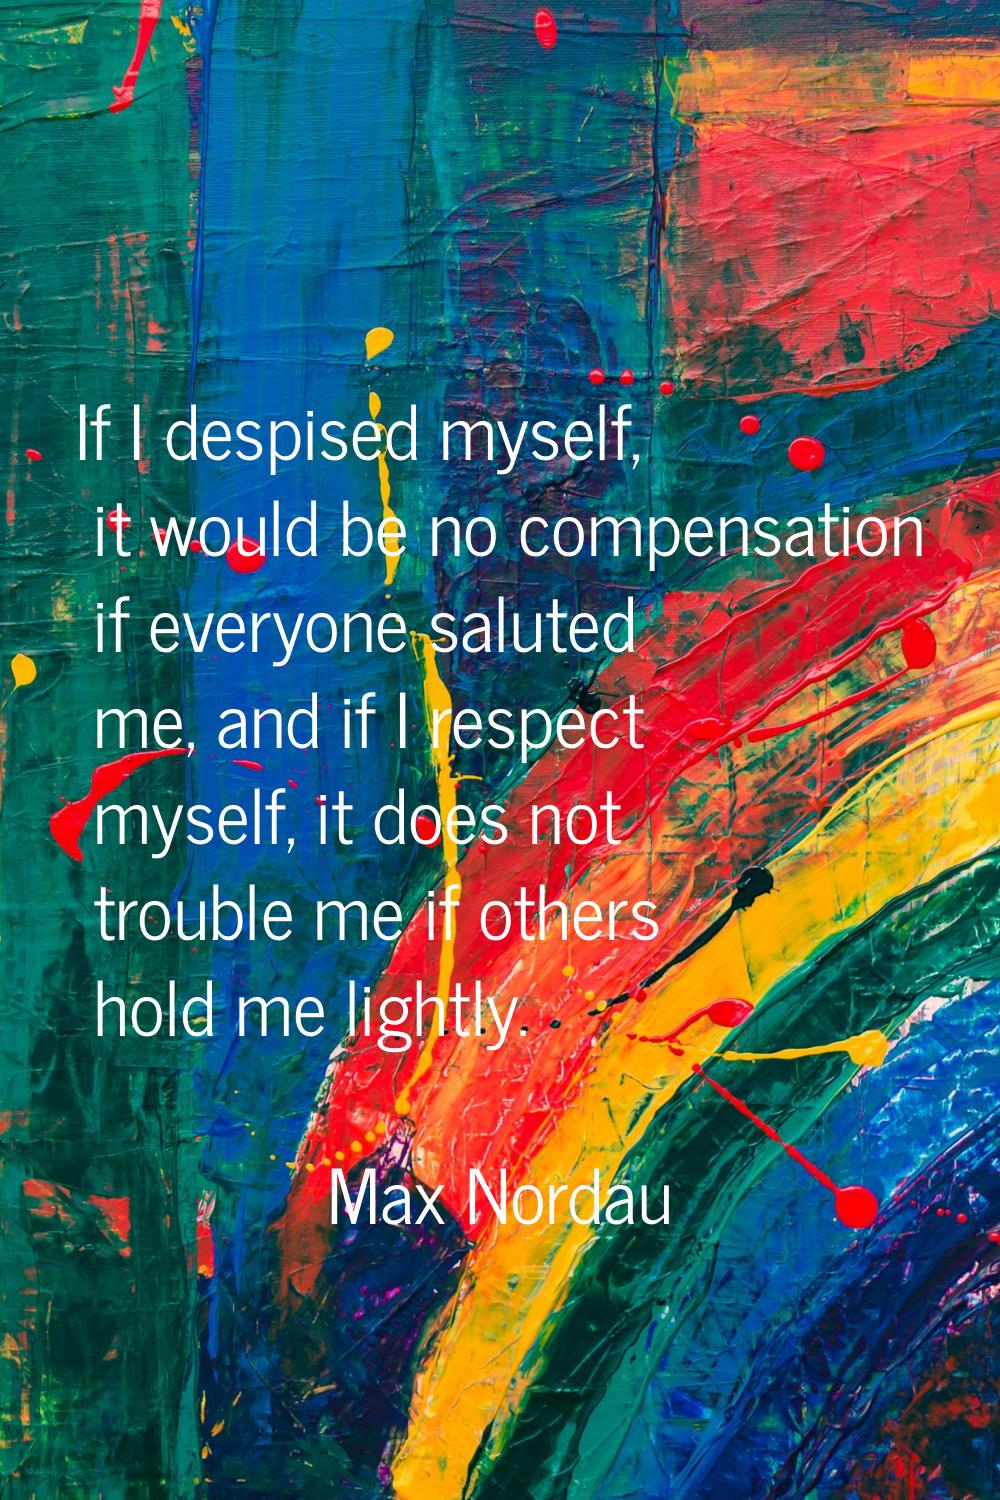 If I despised myself, it would be no compensation if everyone saluted me, and if I respect myself, 